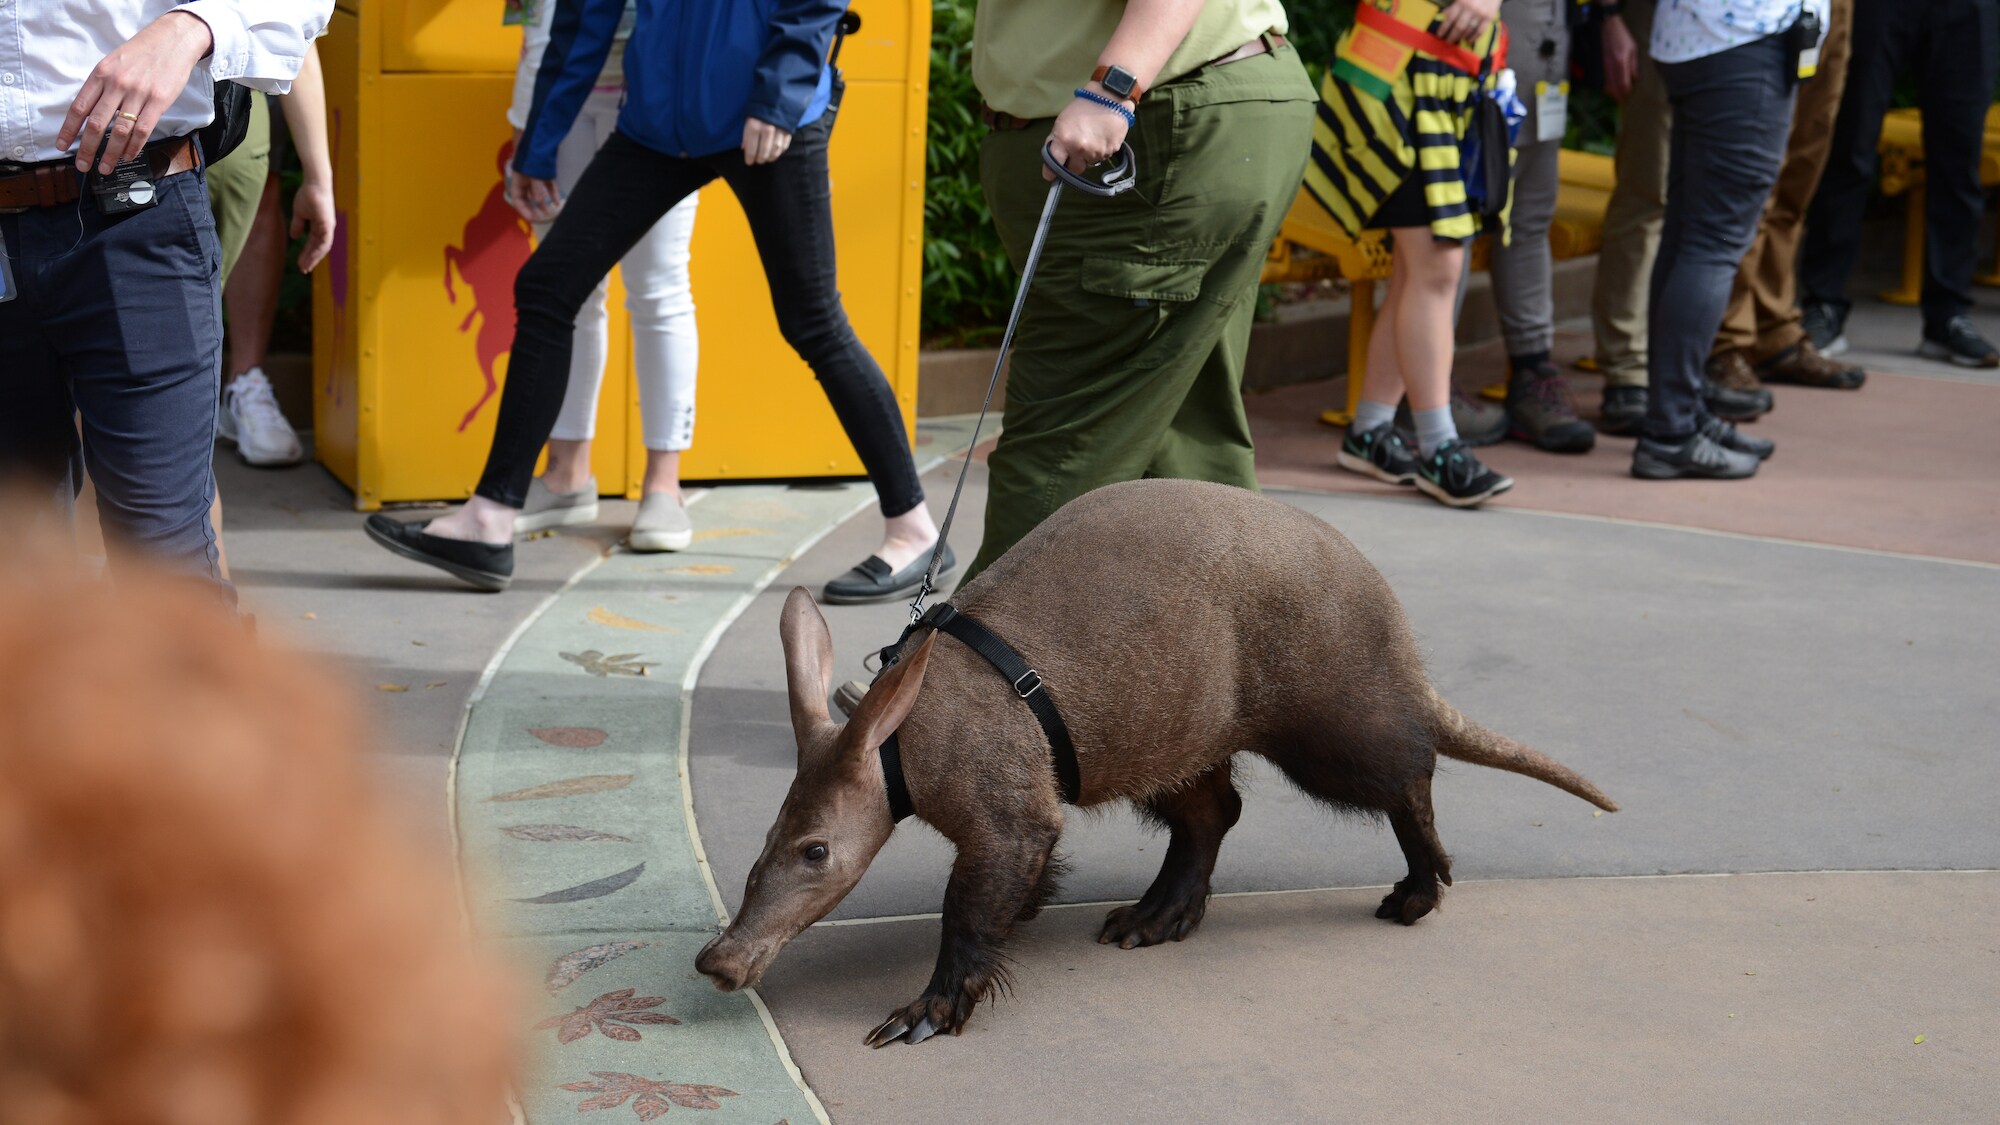 Willie, the aardvark, at the Conservation Station. (National Geographic/Gene Page)